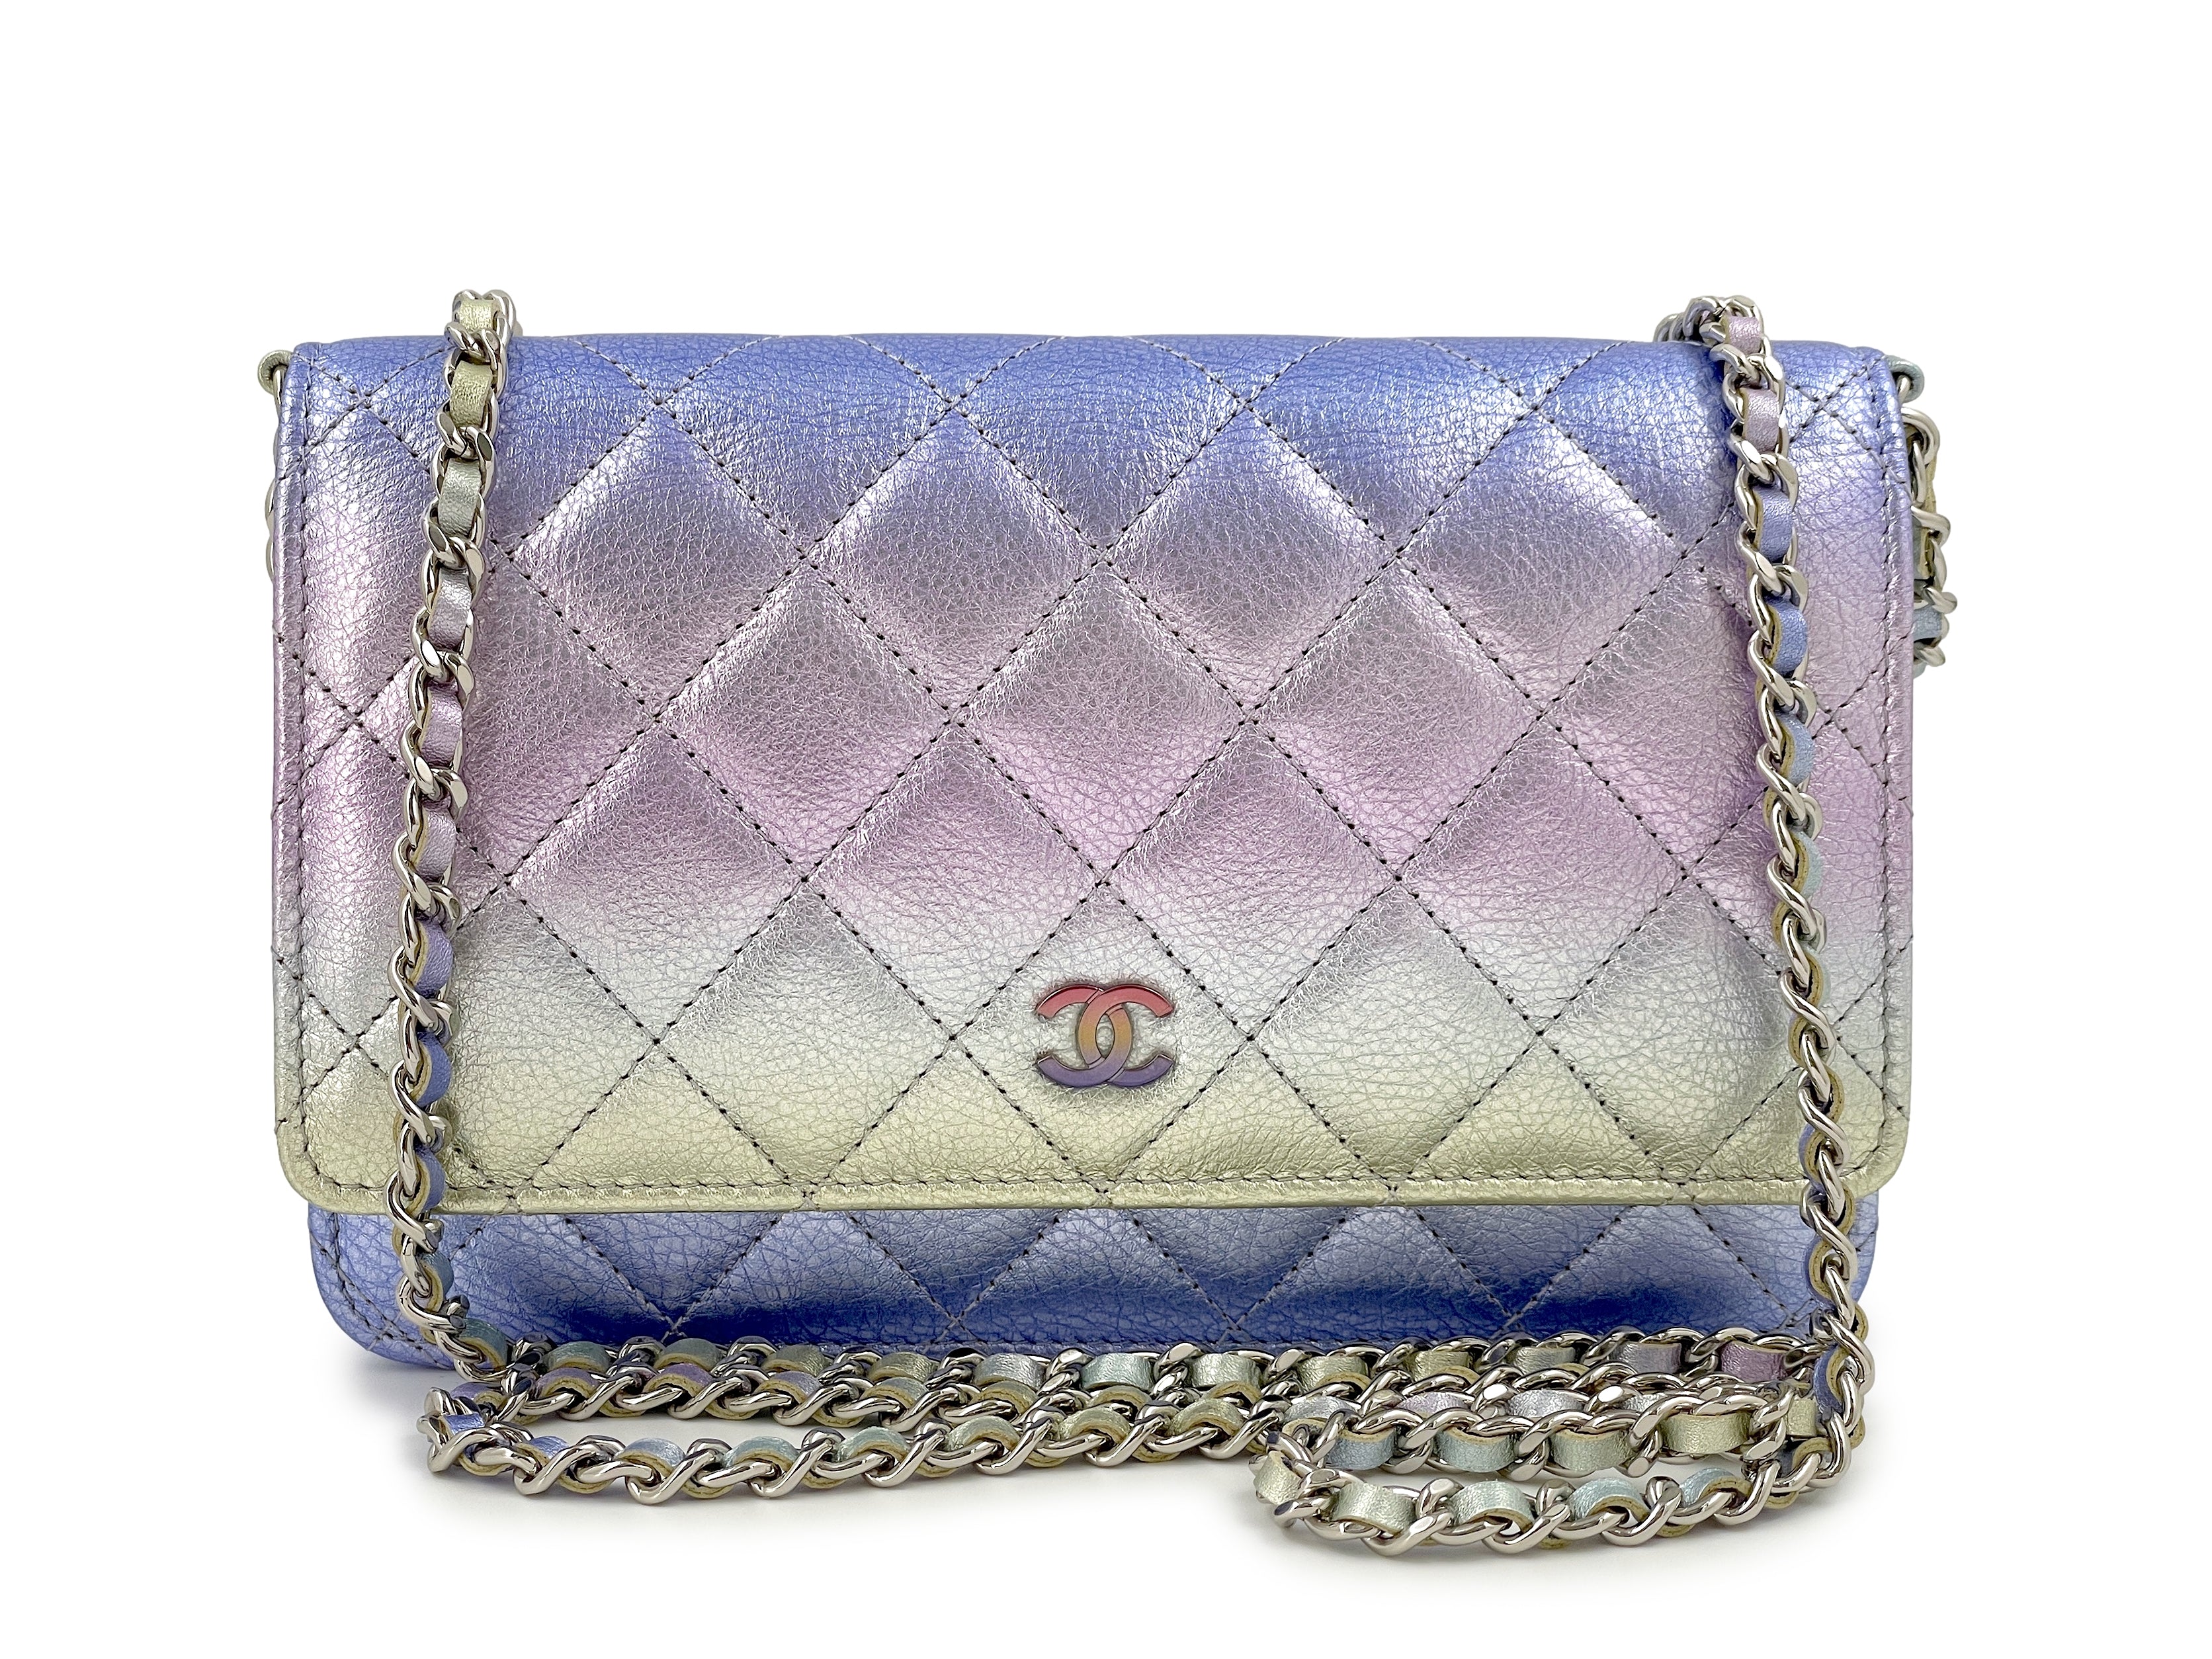 CHANEL, Bags, Chanel 9s Iridescent Pink Round Clutch On Chain